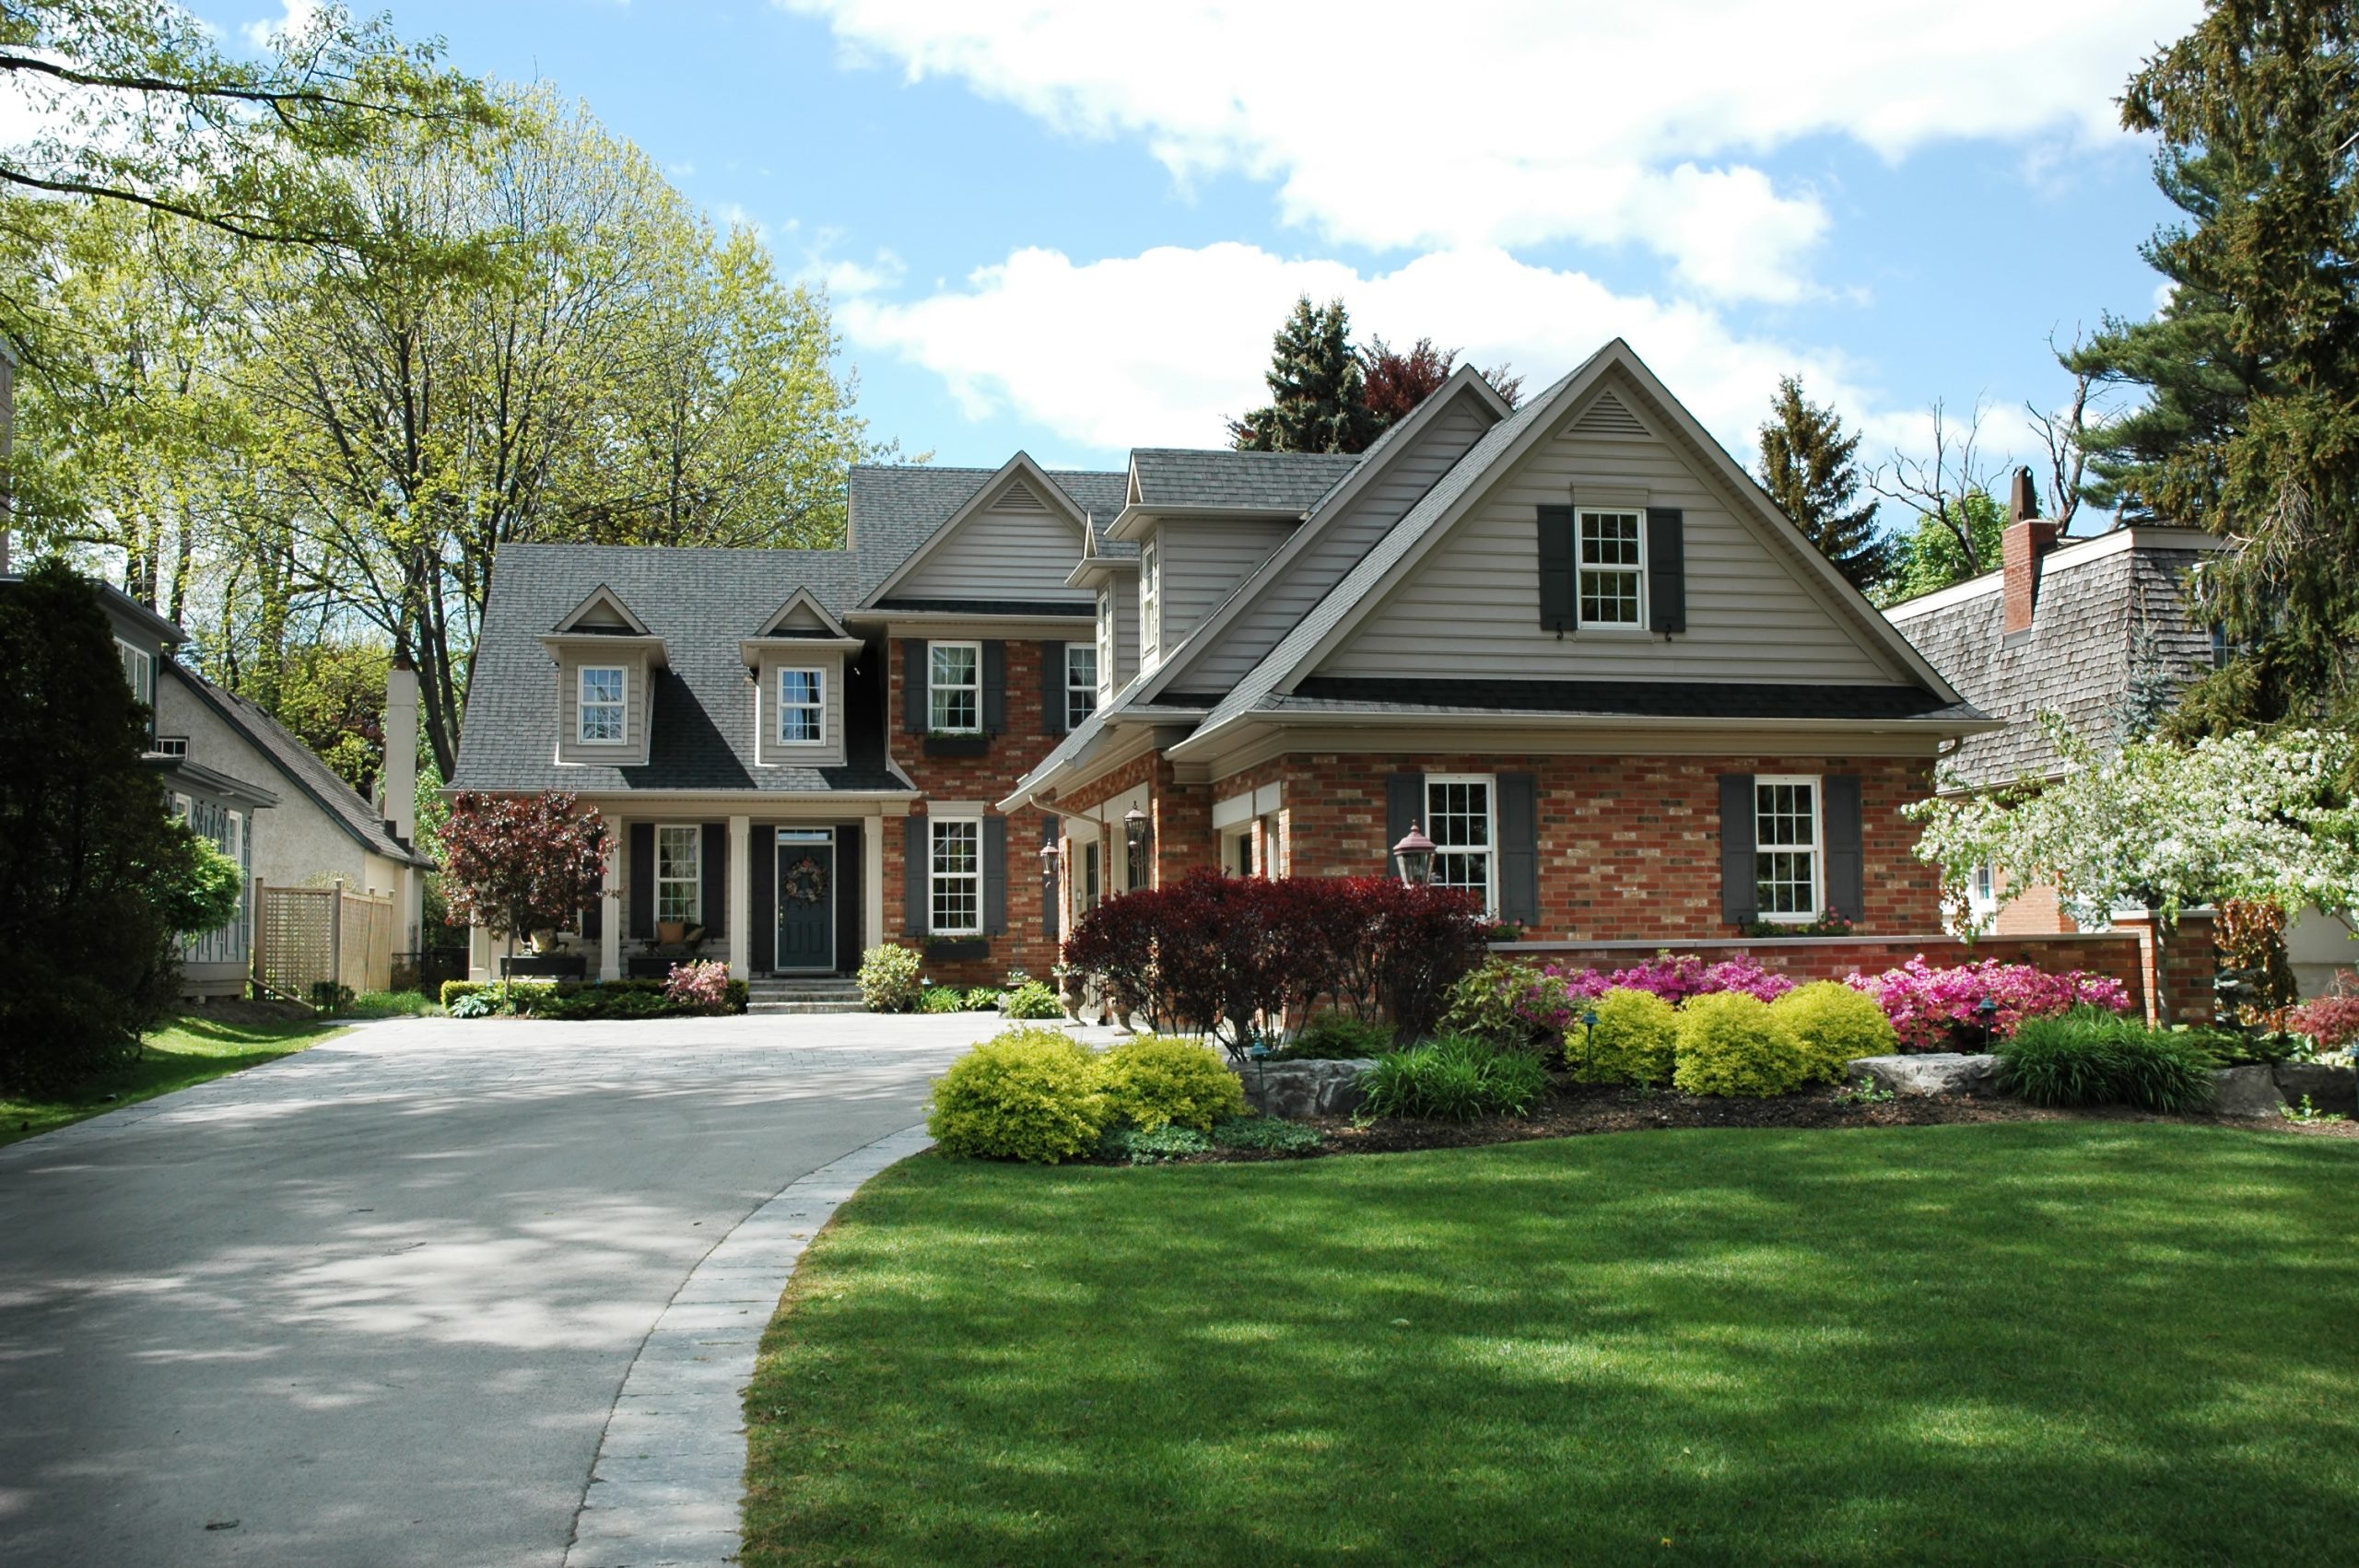 Red brick house with black shutters and pretty manicured lawn / garden